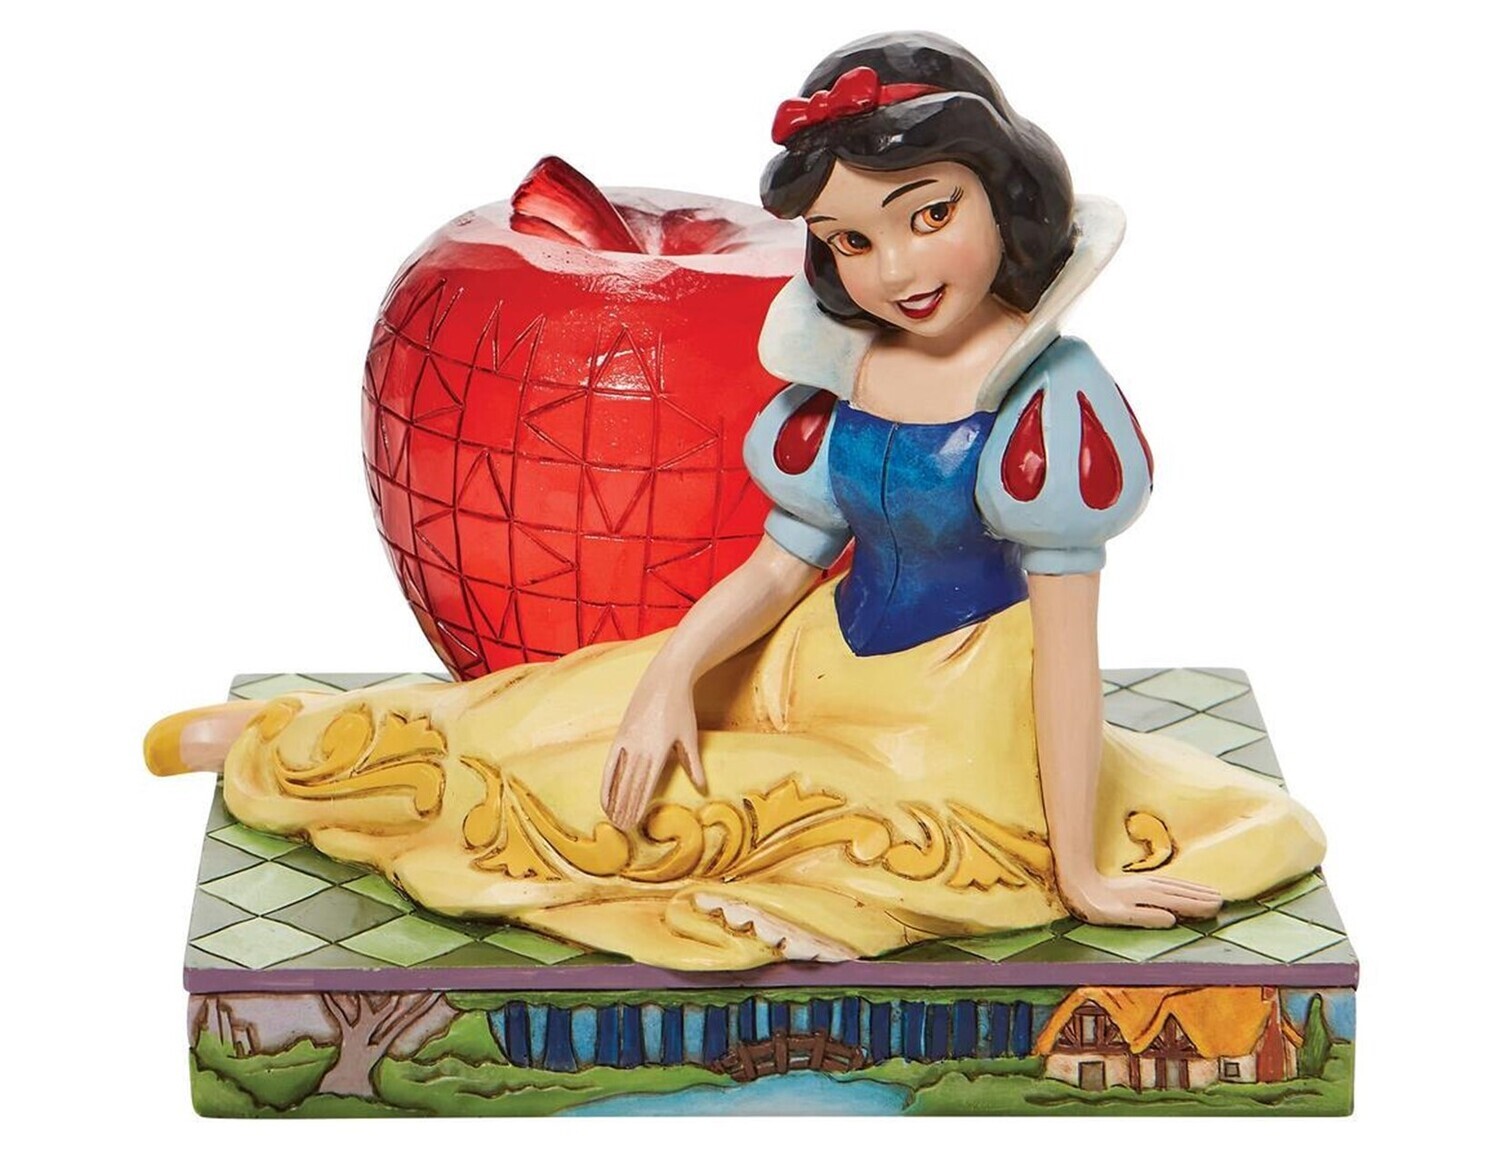 Jim Shore Disney Traditions "Snow White - A Tempting Offer" Figurine (6010098)